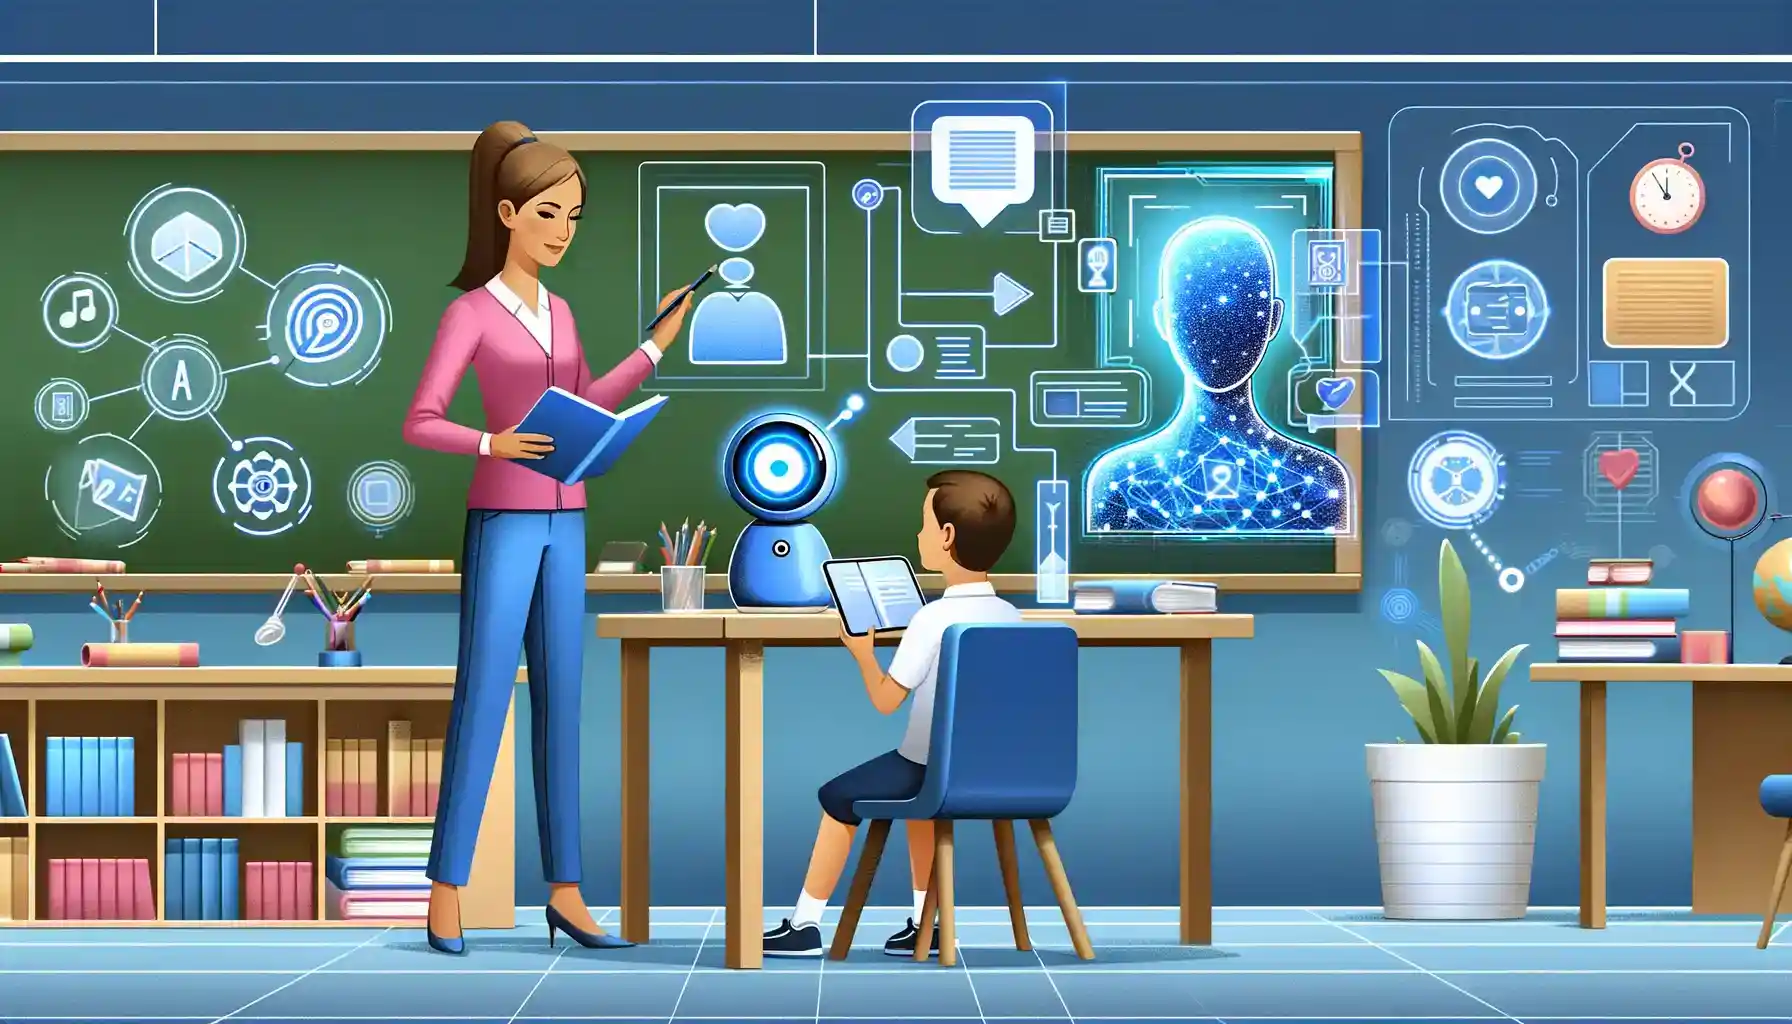 AI transforming education with a teacher and student using AI tools for personalized learning.